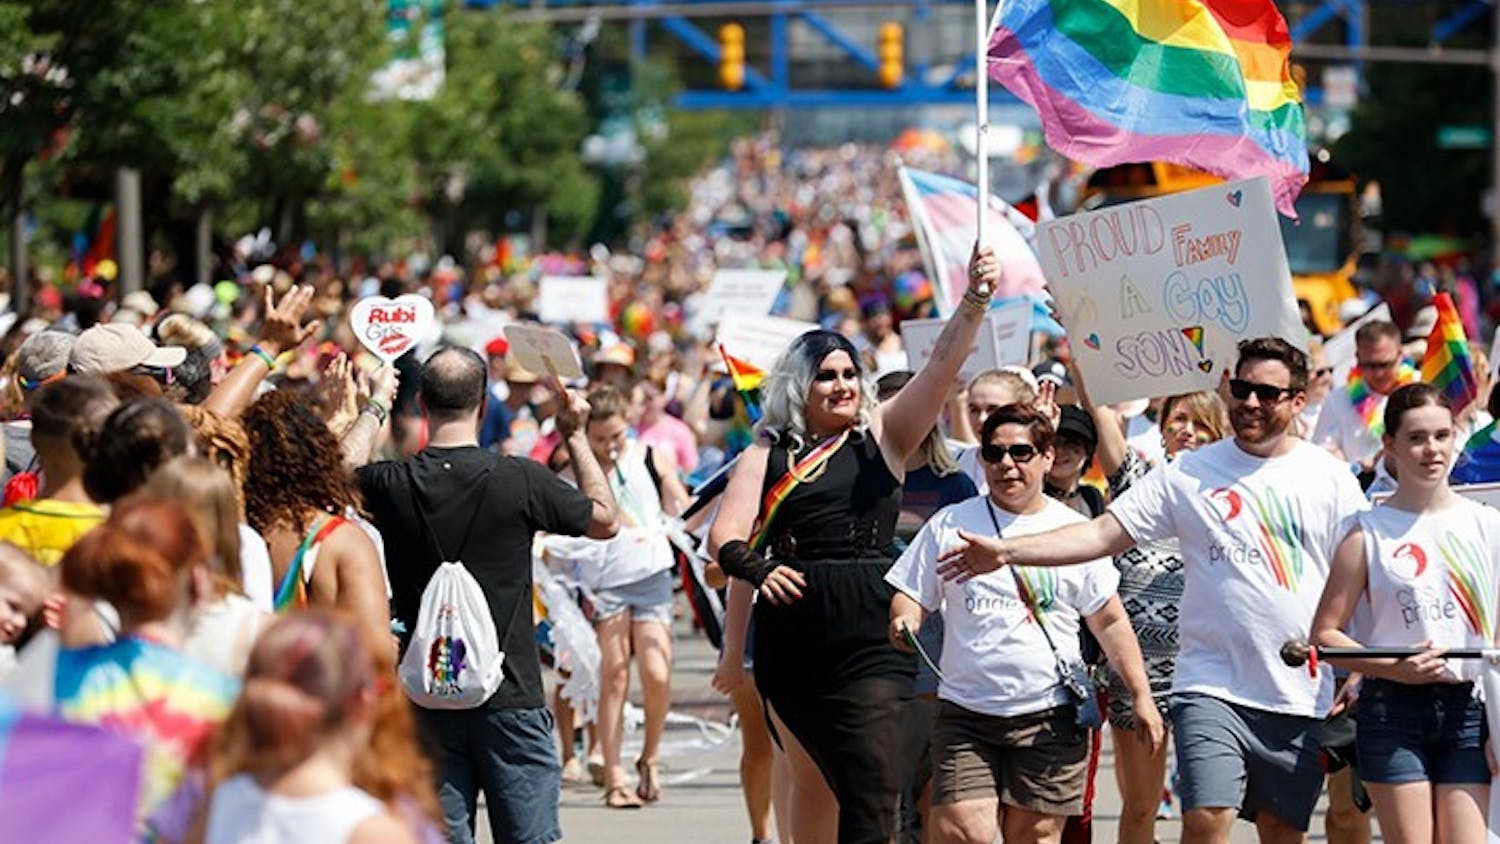 People march at the 2018 Columbus Pride Parade. The public support for gay rights has increased massively in the past 40 years, historical data shows. (The Columbus Dispatch/TNS)